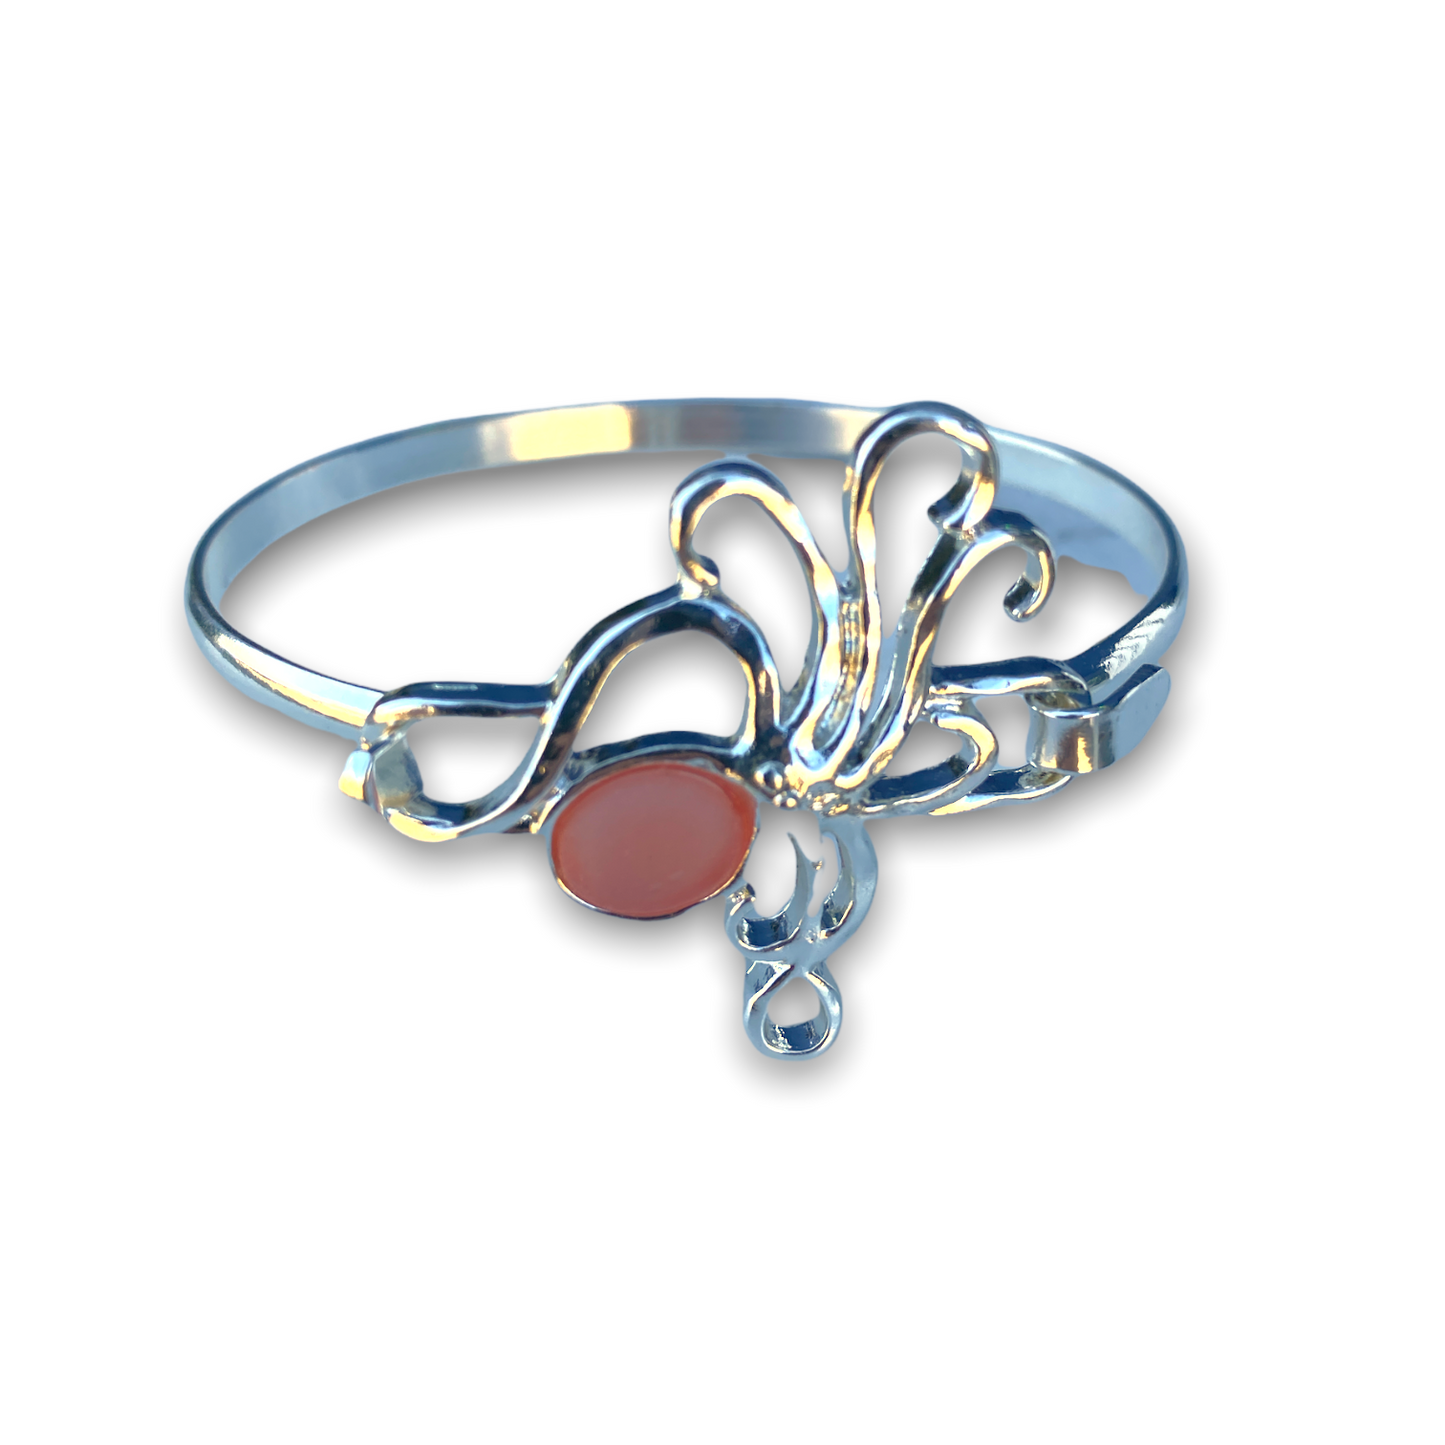 Polished Metal Octopus Bangle Bracelet with Peach Glass Stone Inlay - Mellow Monkey